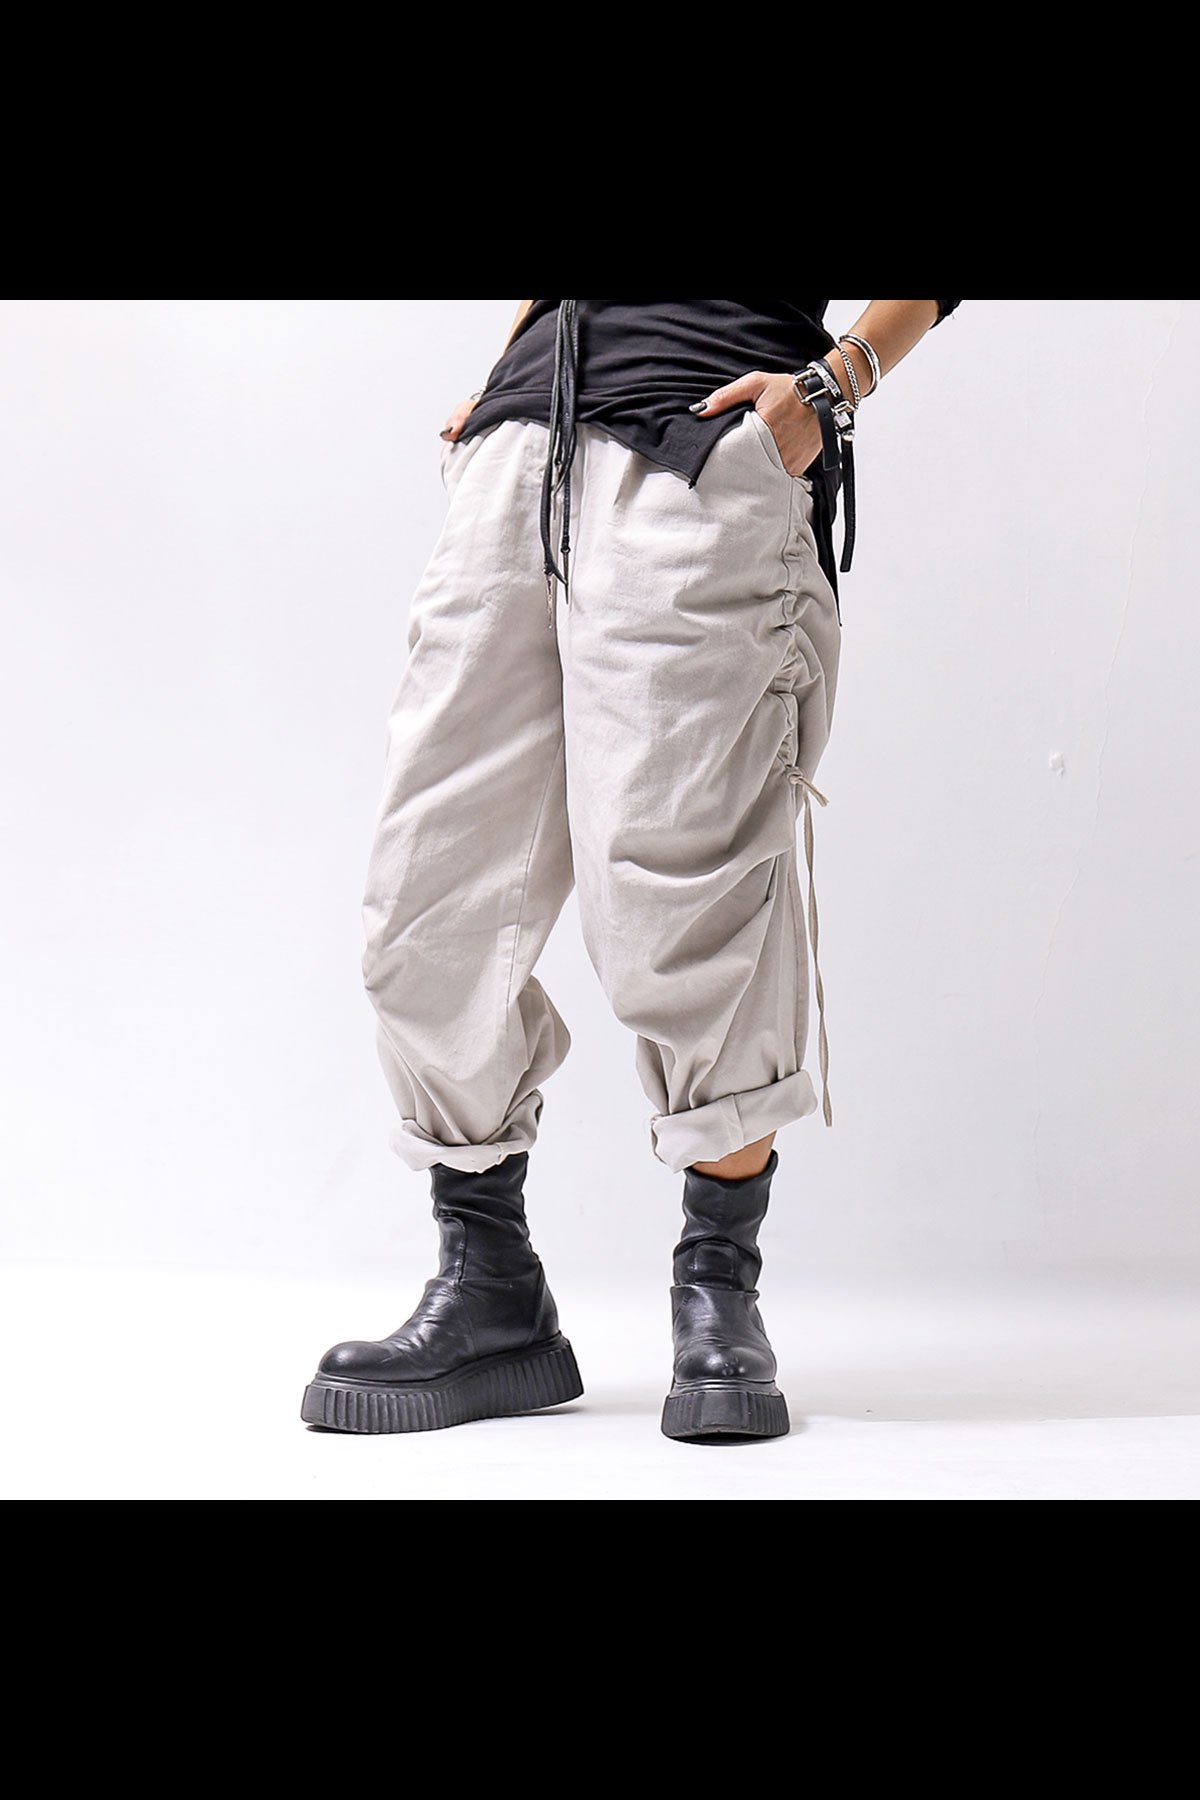 <img class='new_mark_img1' src='https://img.shop-pro.jp/img/new/icons8.gif' style='border:none;display:inline;margin:0px;padding:0px;width:auto;' />UNISEX SIDE STRING CODE PANTS 319/MM_DESERT